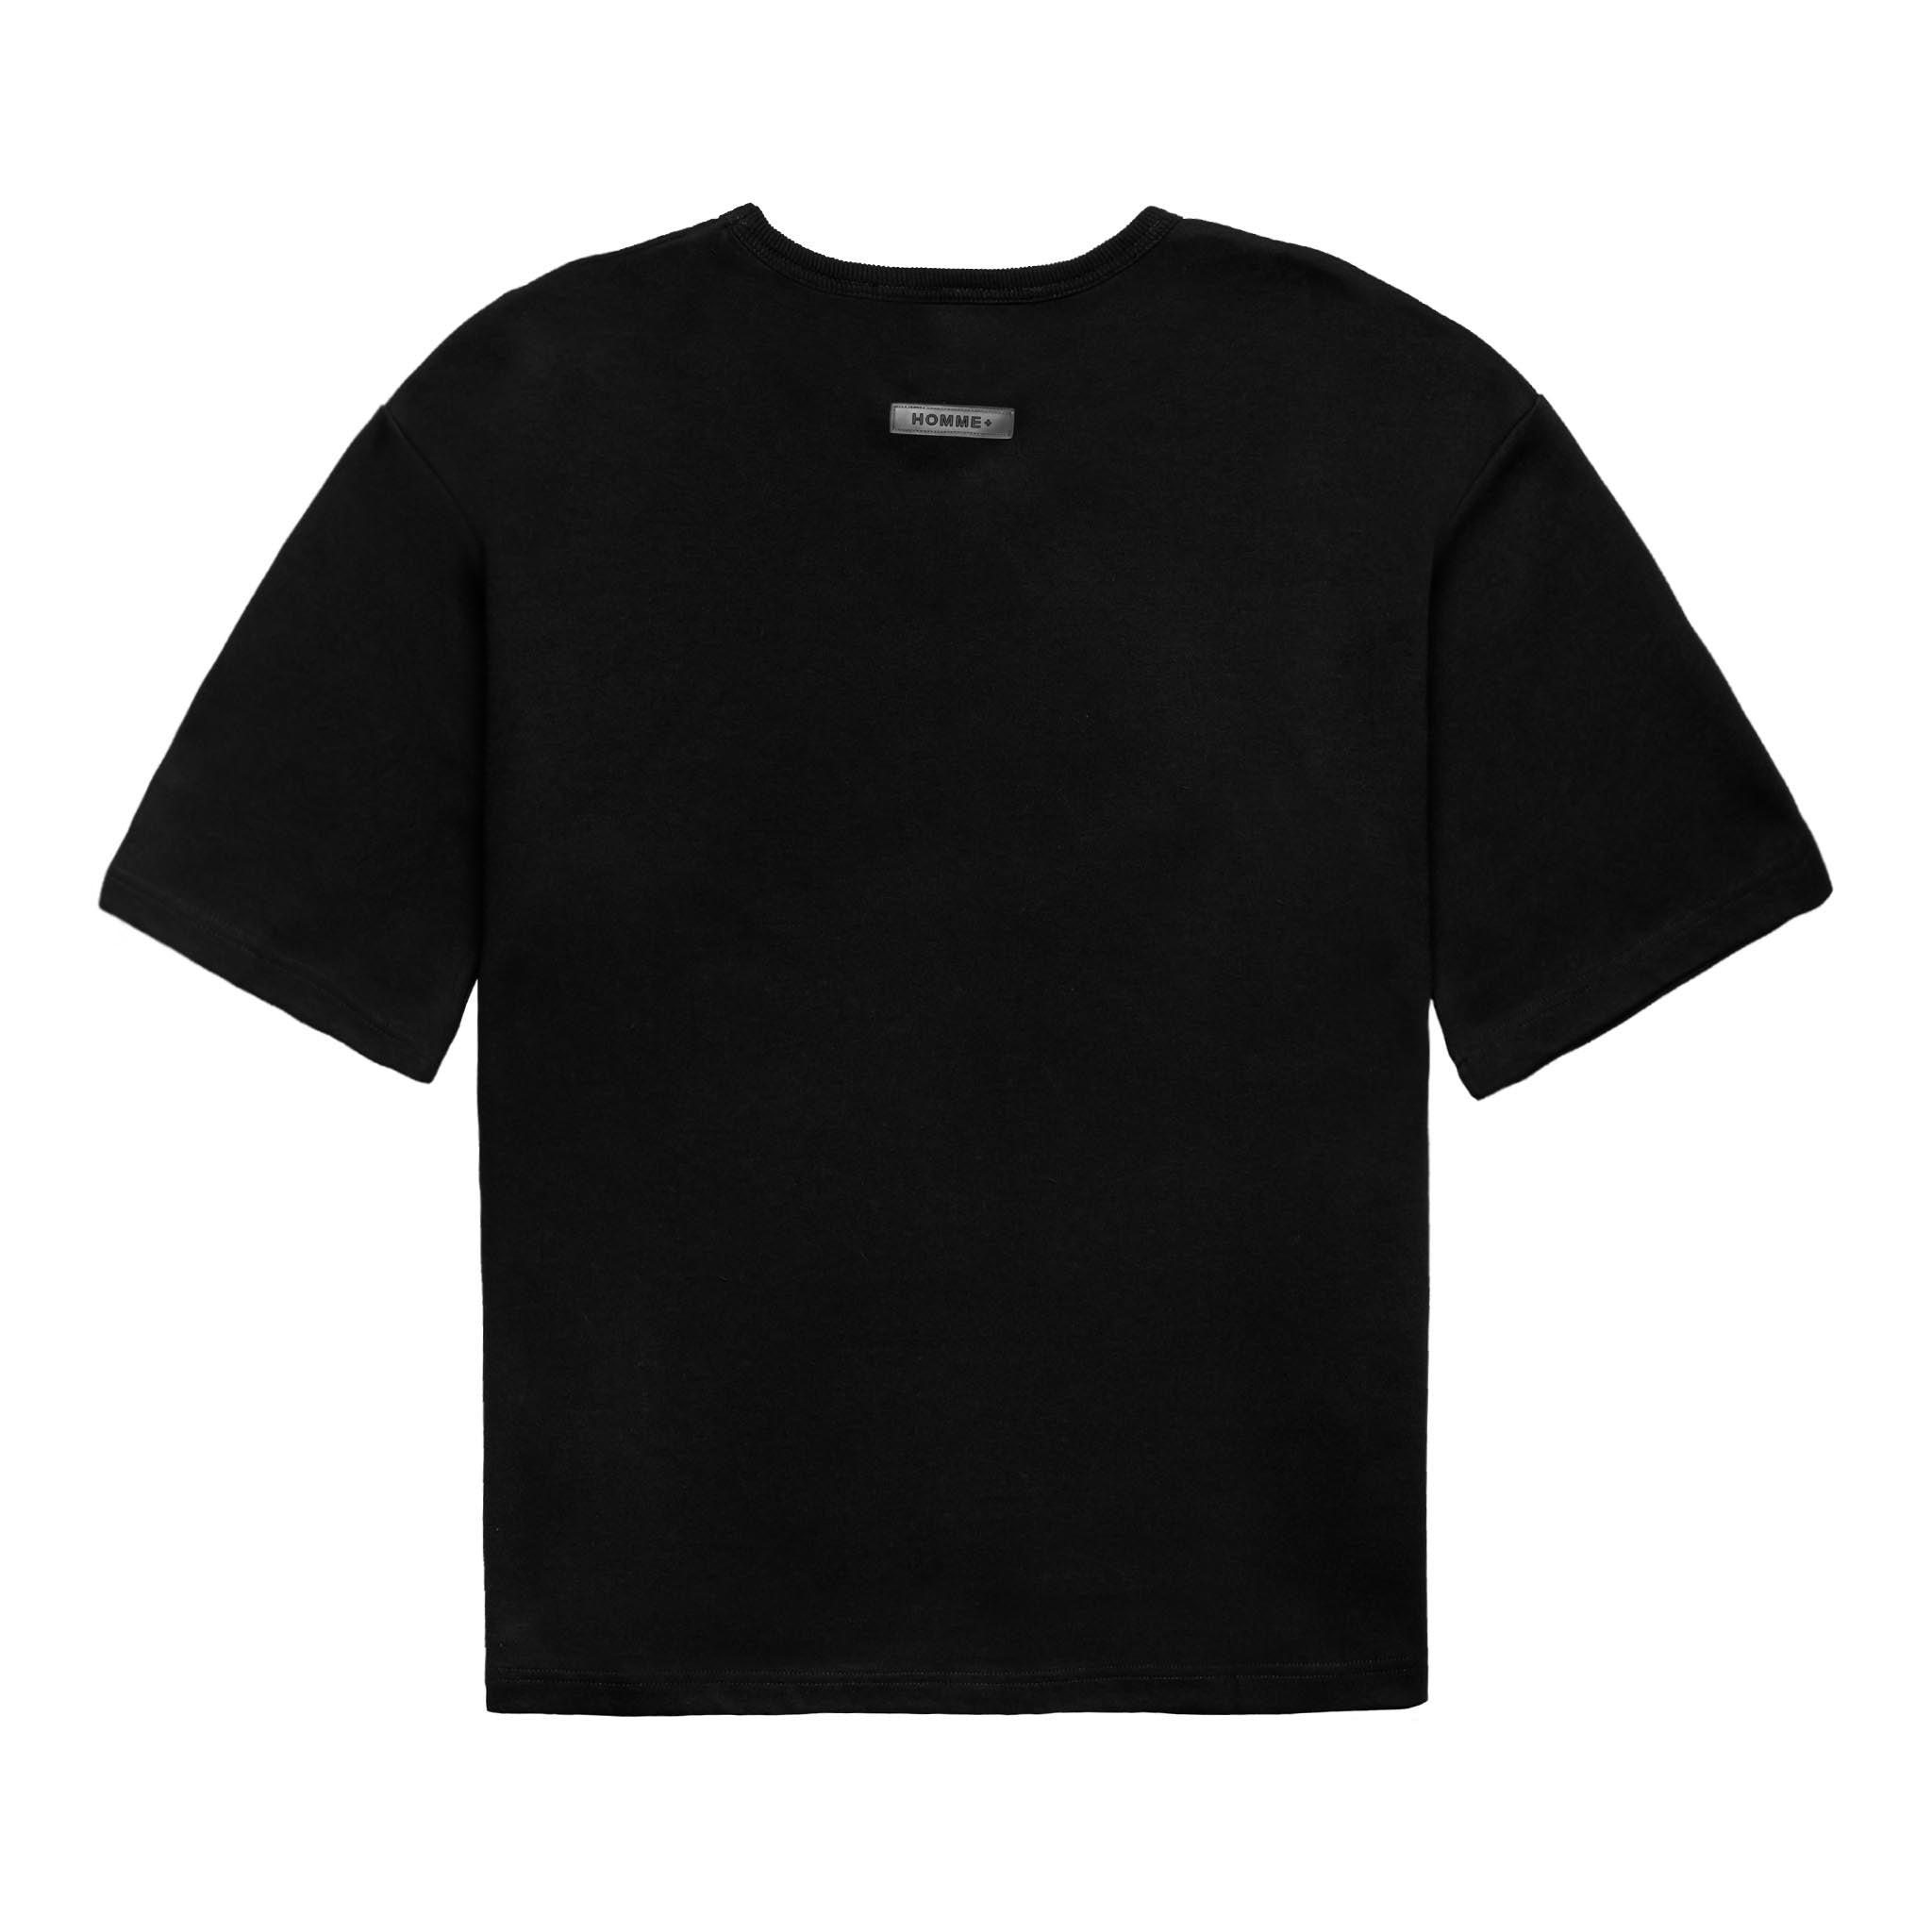 HOMME+ 'ESSENTIAL' Heavyweight Boxy Tee Black/White & SNEAKERBOX